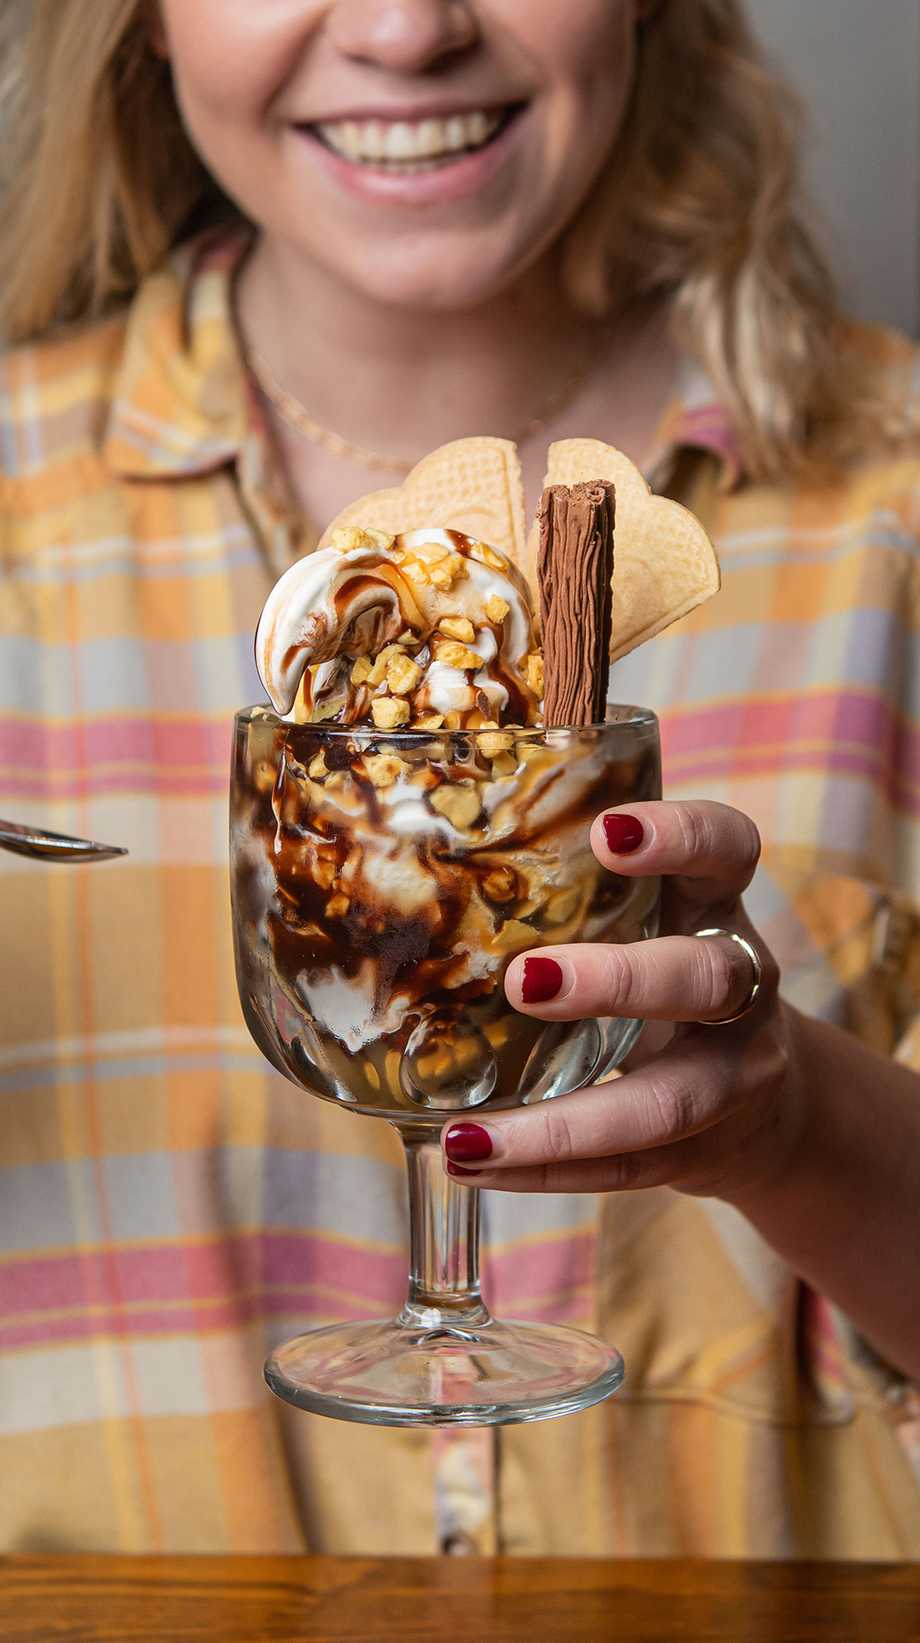 A guest holds a chocolatey sundae with wafers and a flake up to the camera while smiling.